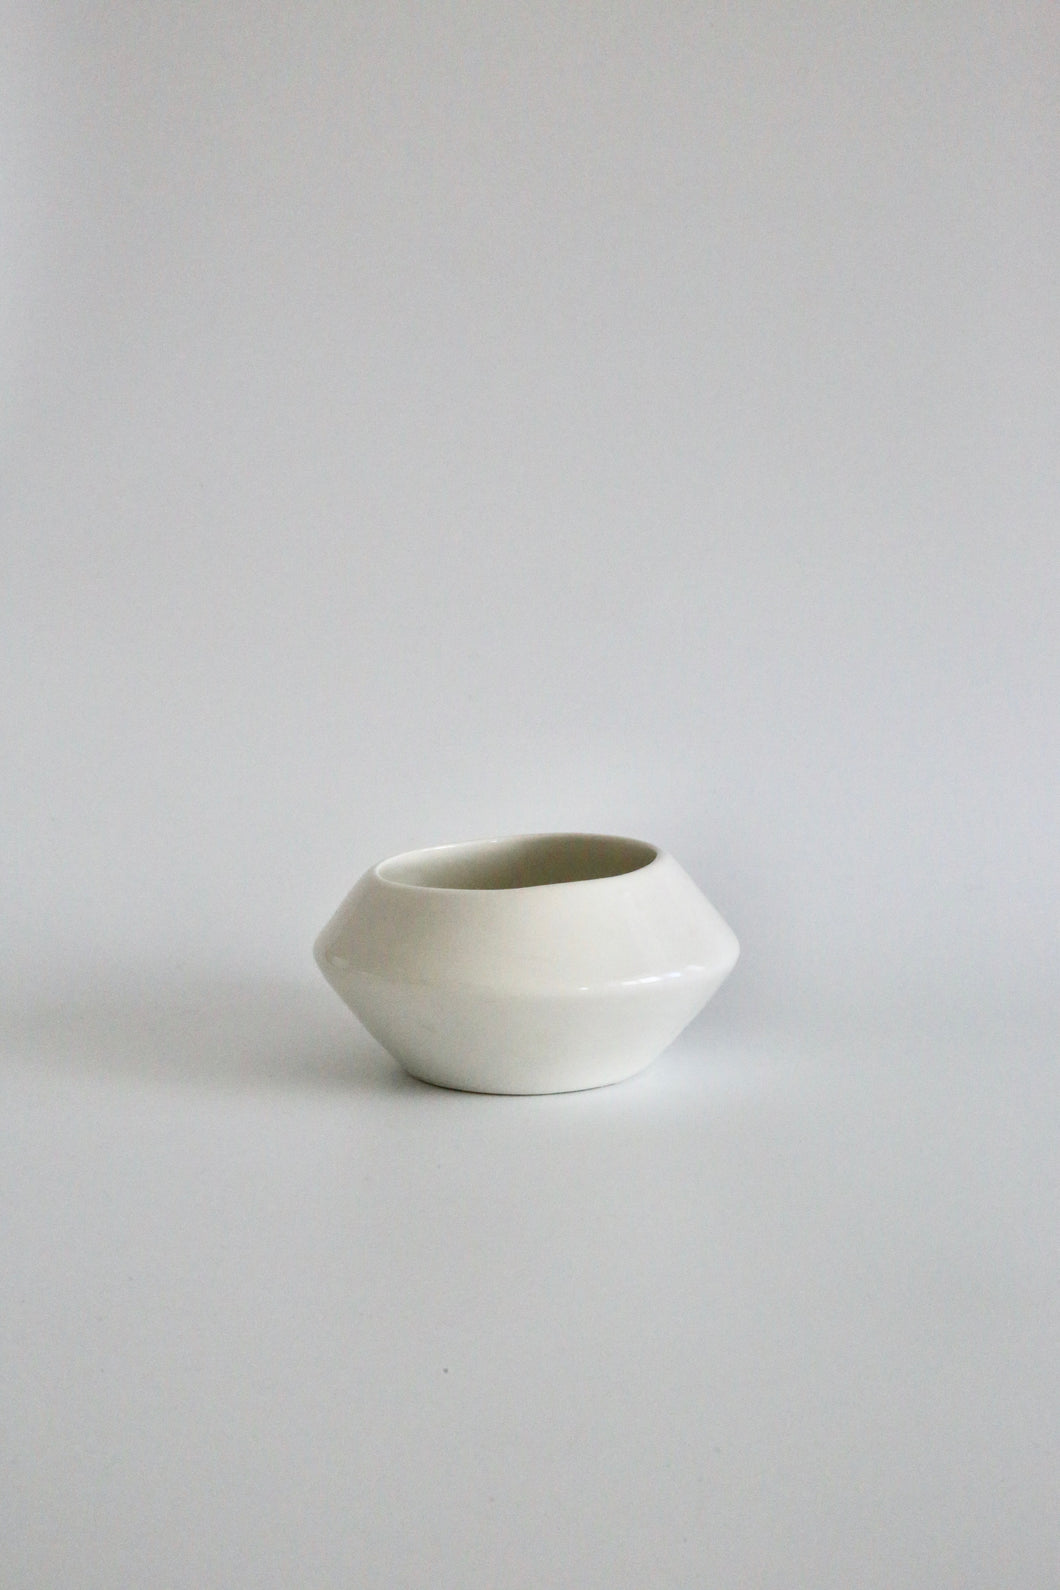 【ARC objects】waves vase